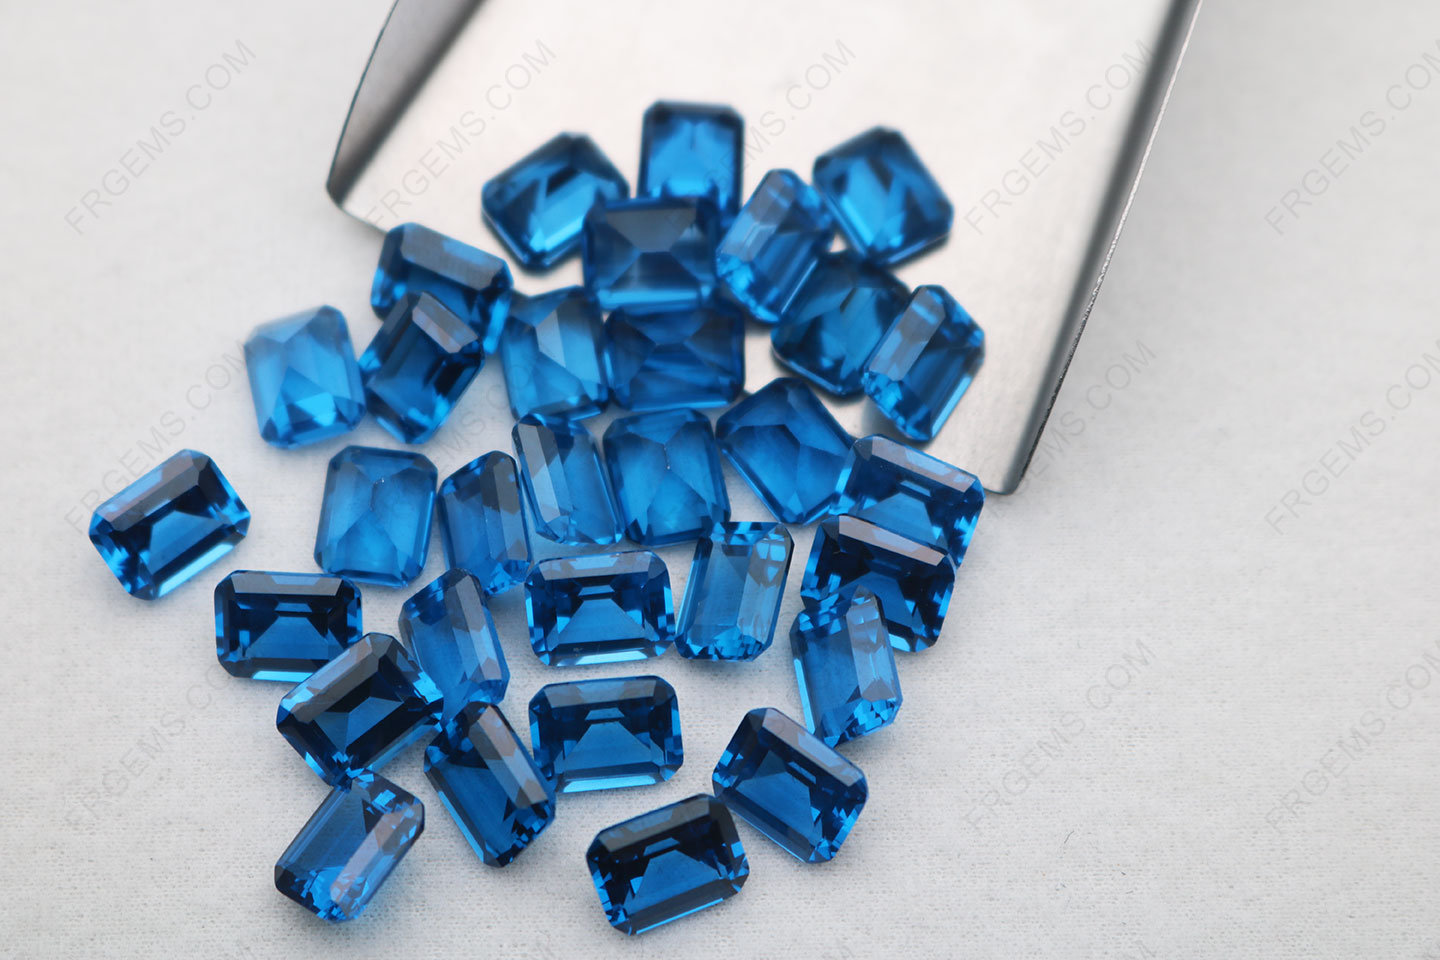 Synthetic Spinel Swiss Blue color 119# Emerald Cut 11x9mm Loose Gemstones Suppliers